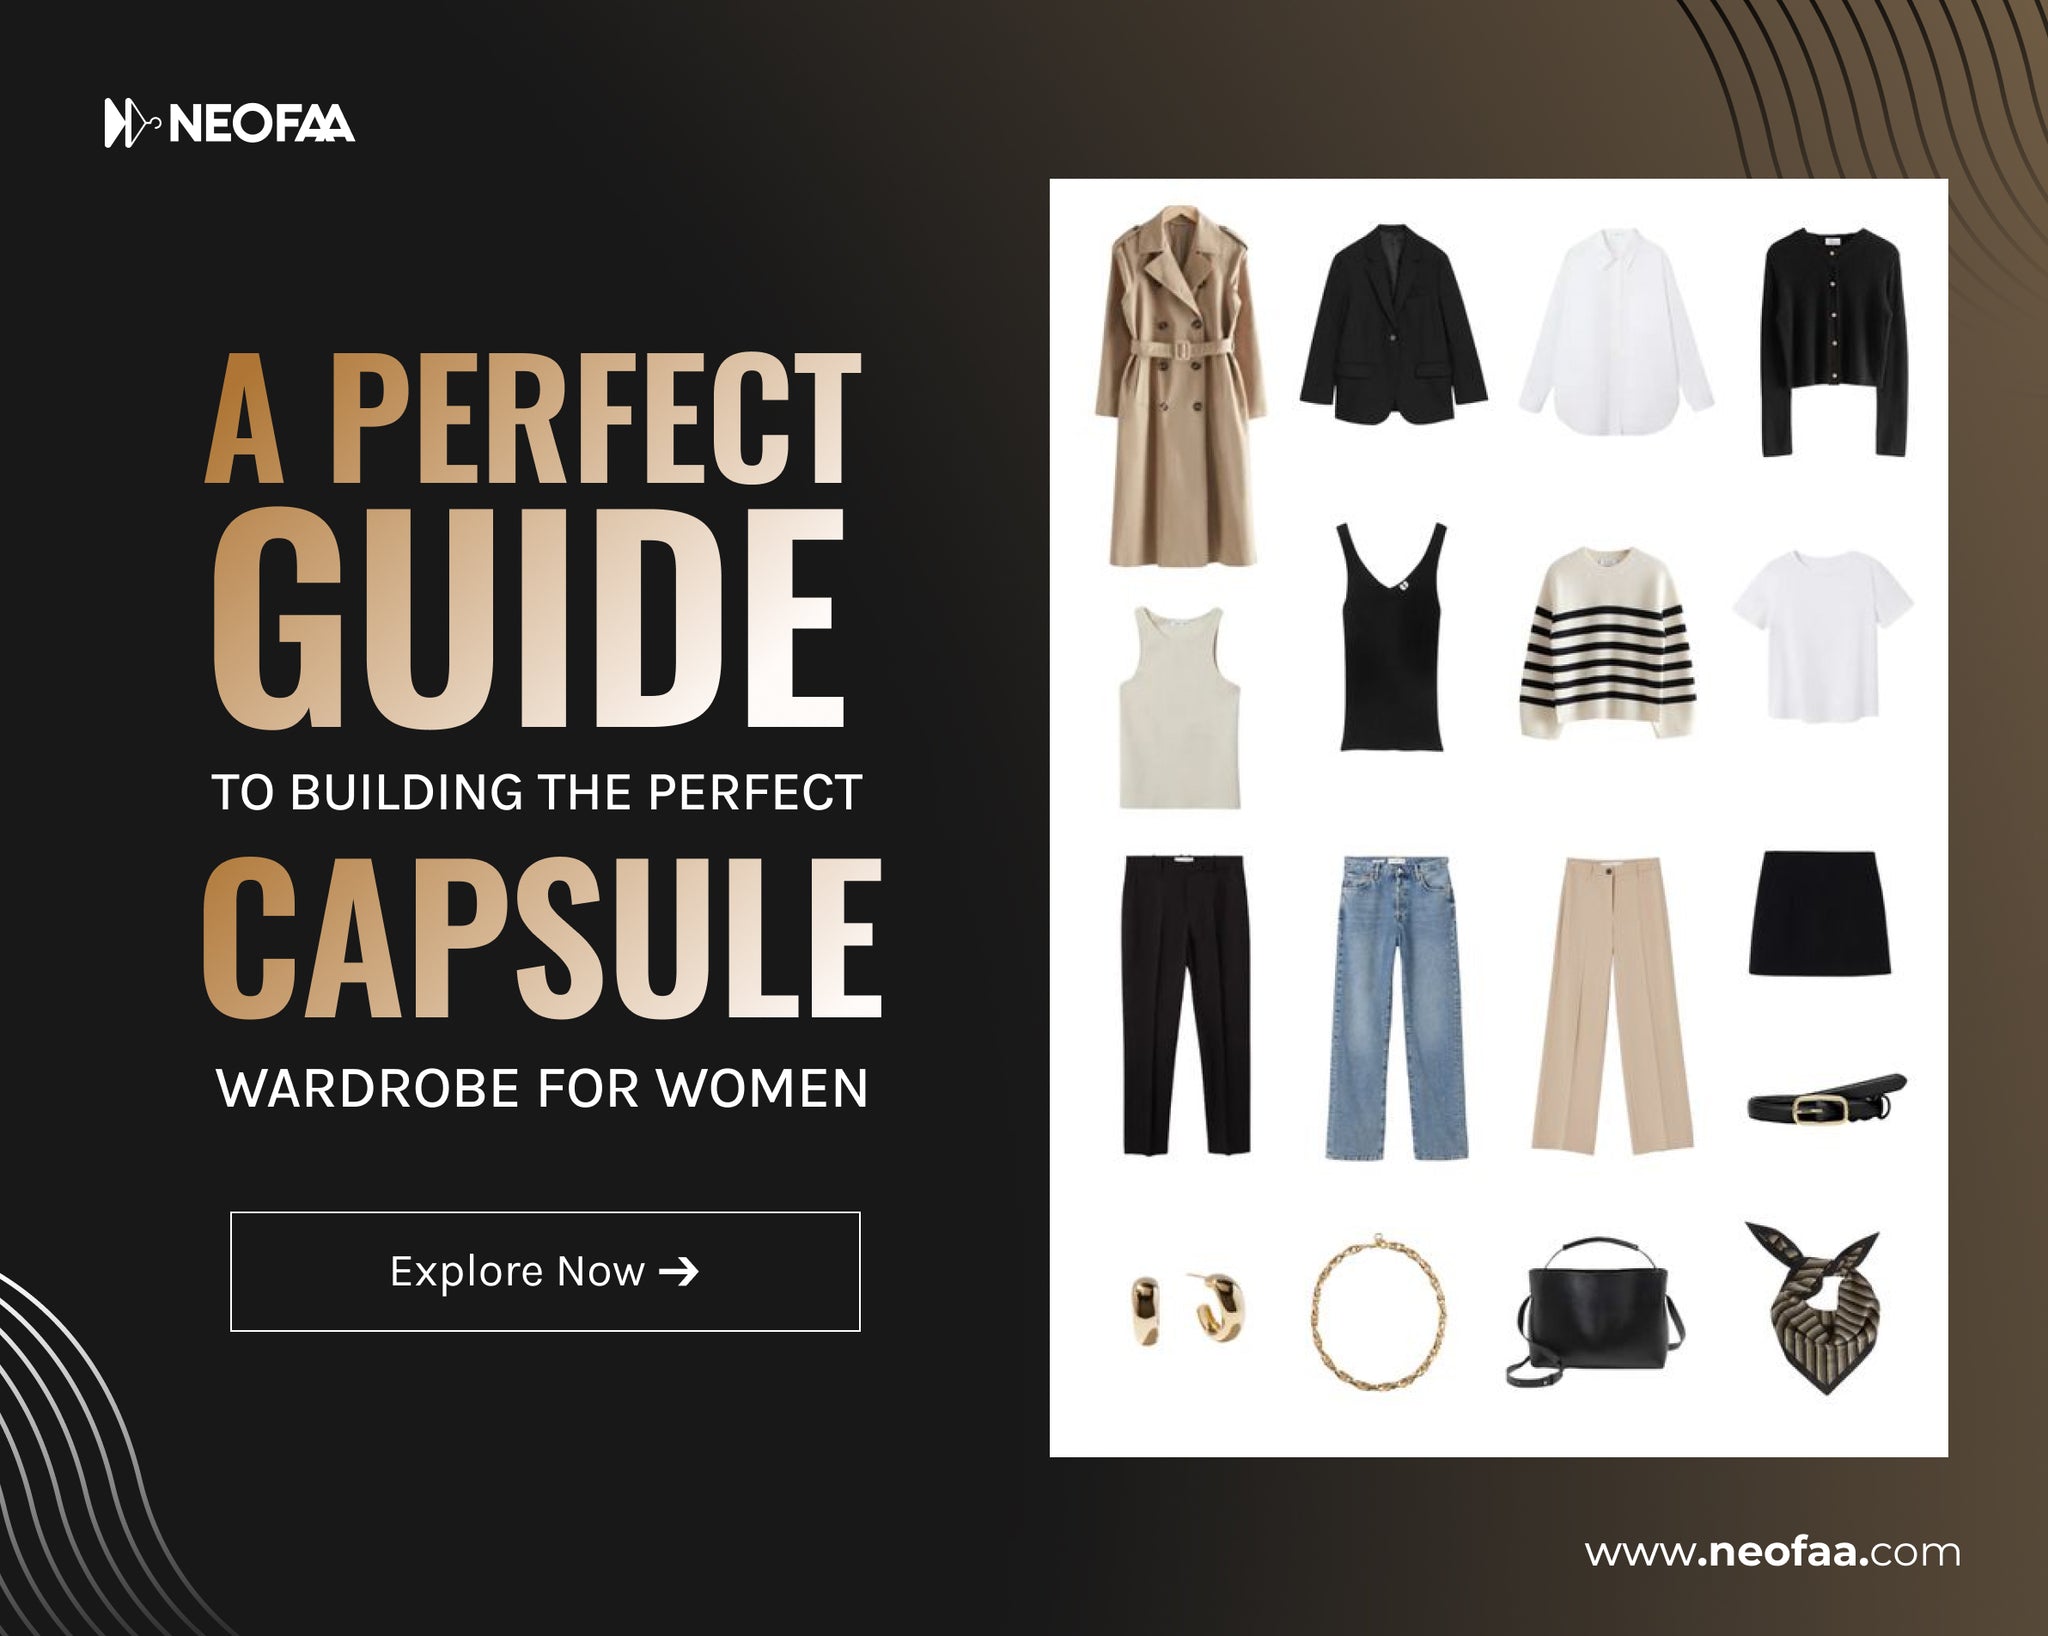 A Perfect Guide to Building the Perfect Capsule Wardrobe for Women